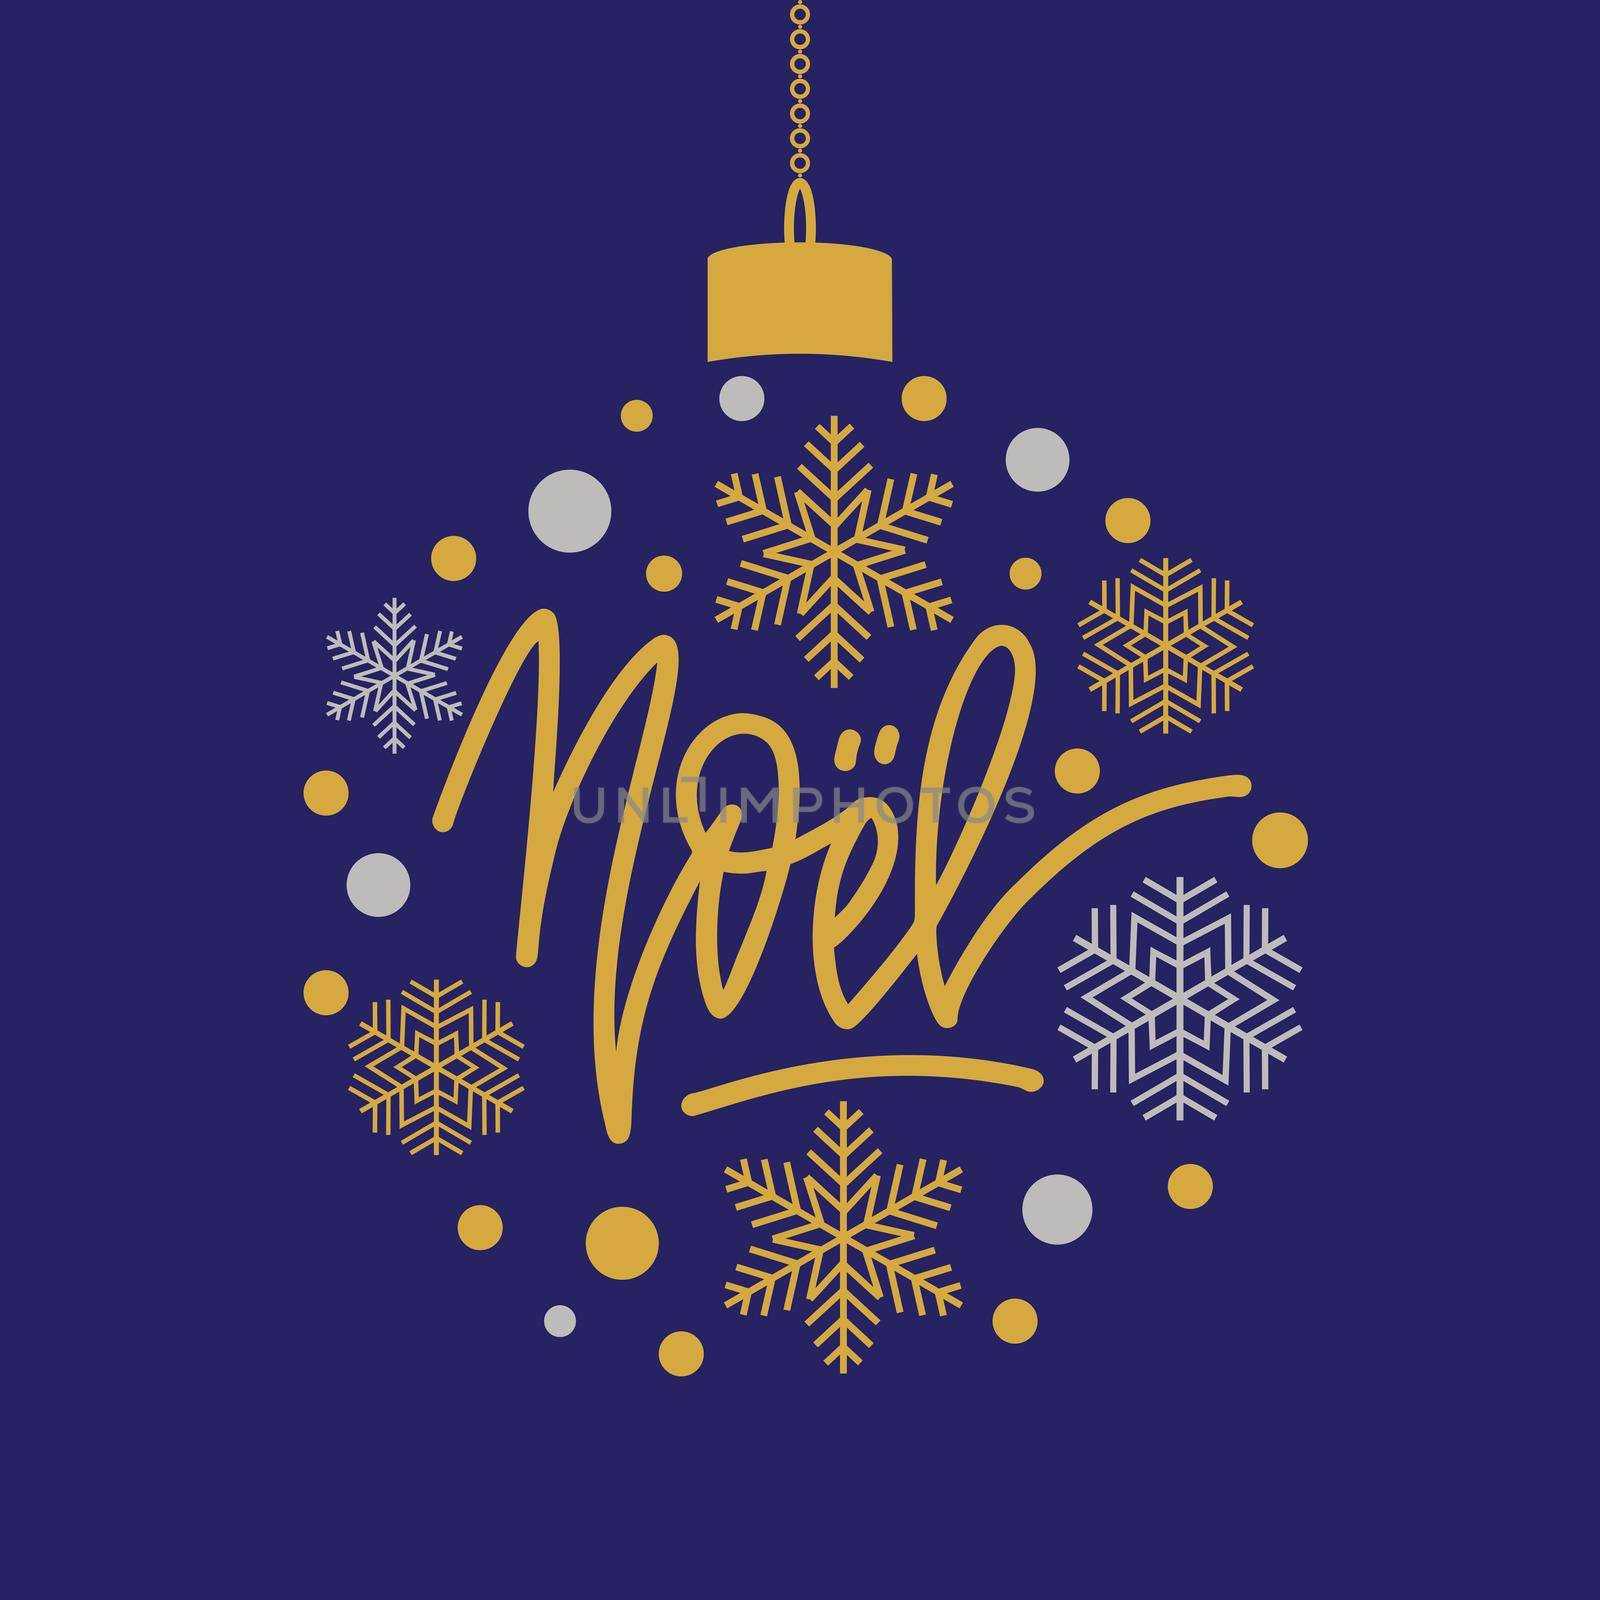 Christmas in French greeting. Noel. Handwritten lettering with snowflakes in Christmas ball. illustration for greeting cards, posters and much more.